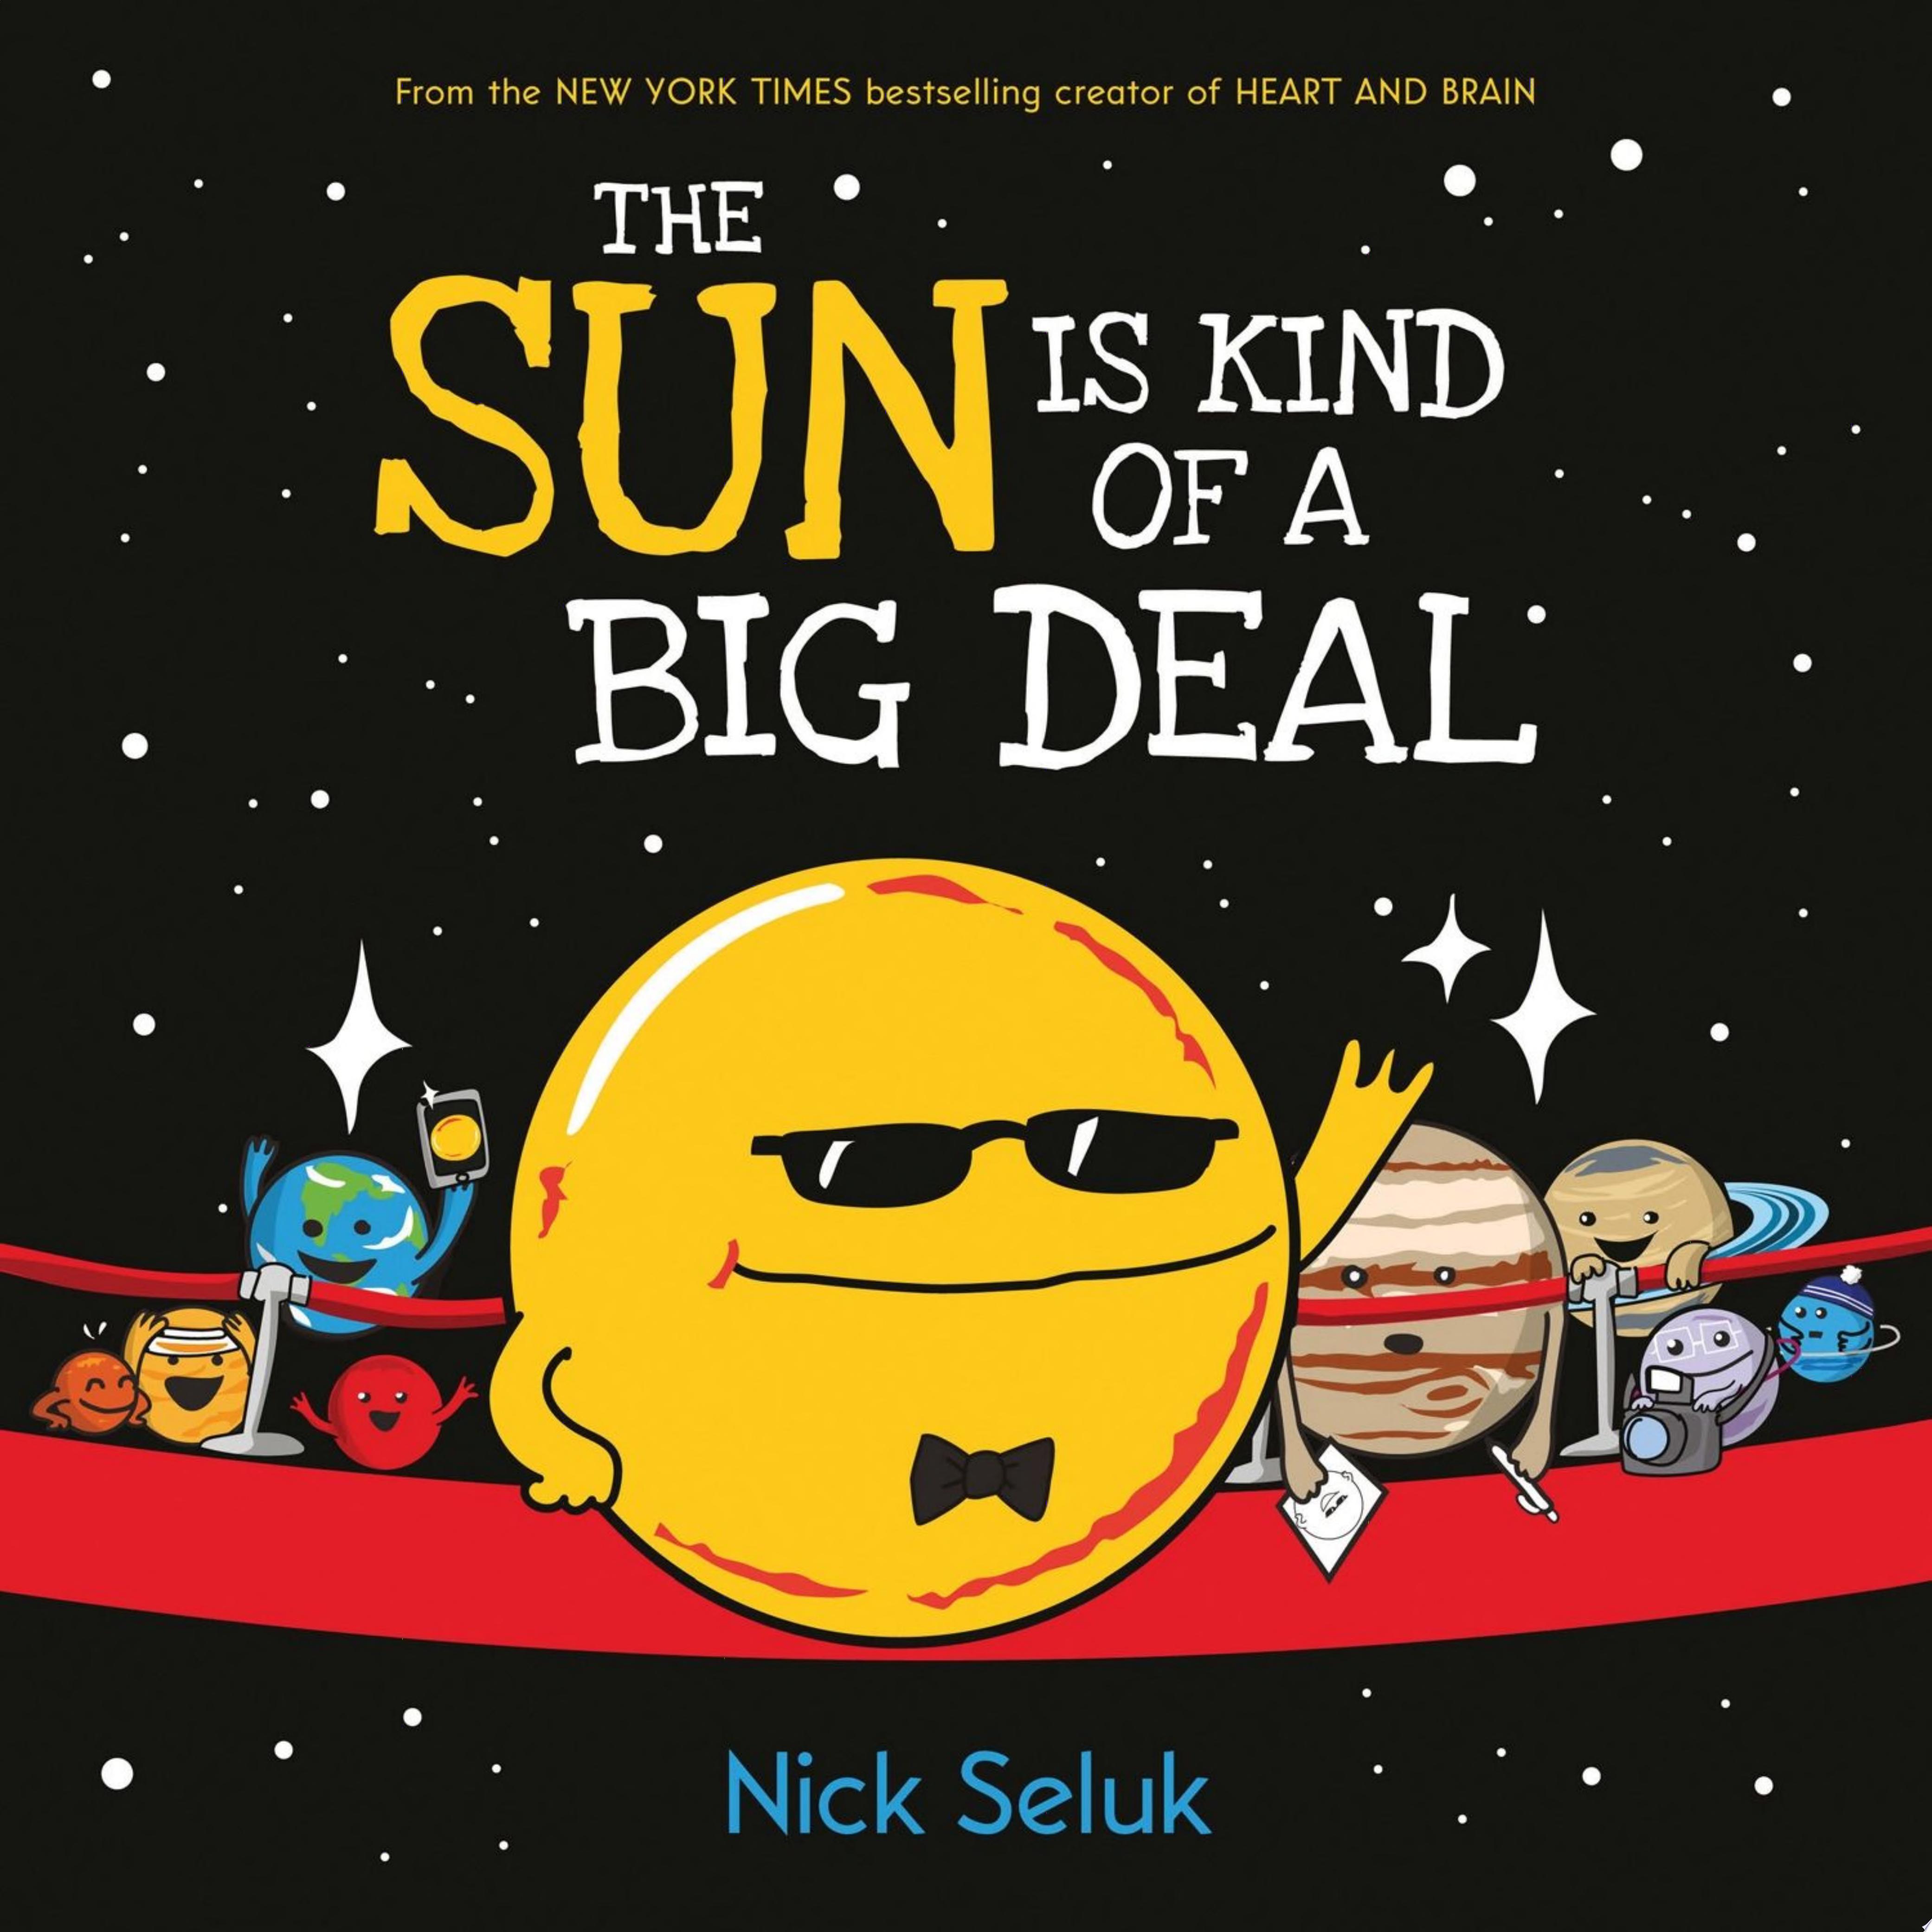 Image for "The Sun Is Kind of a Big Deal"